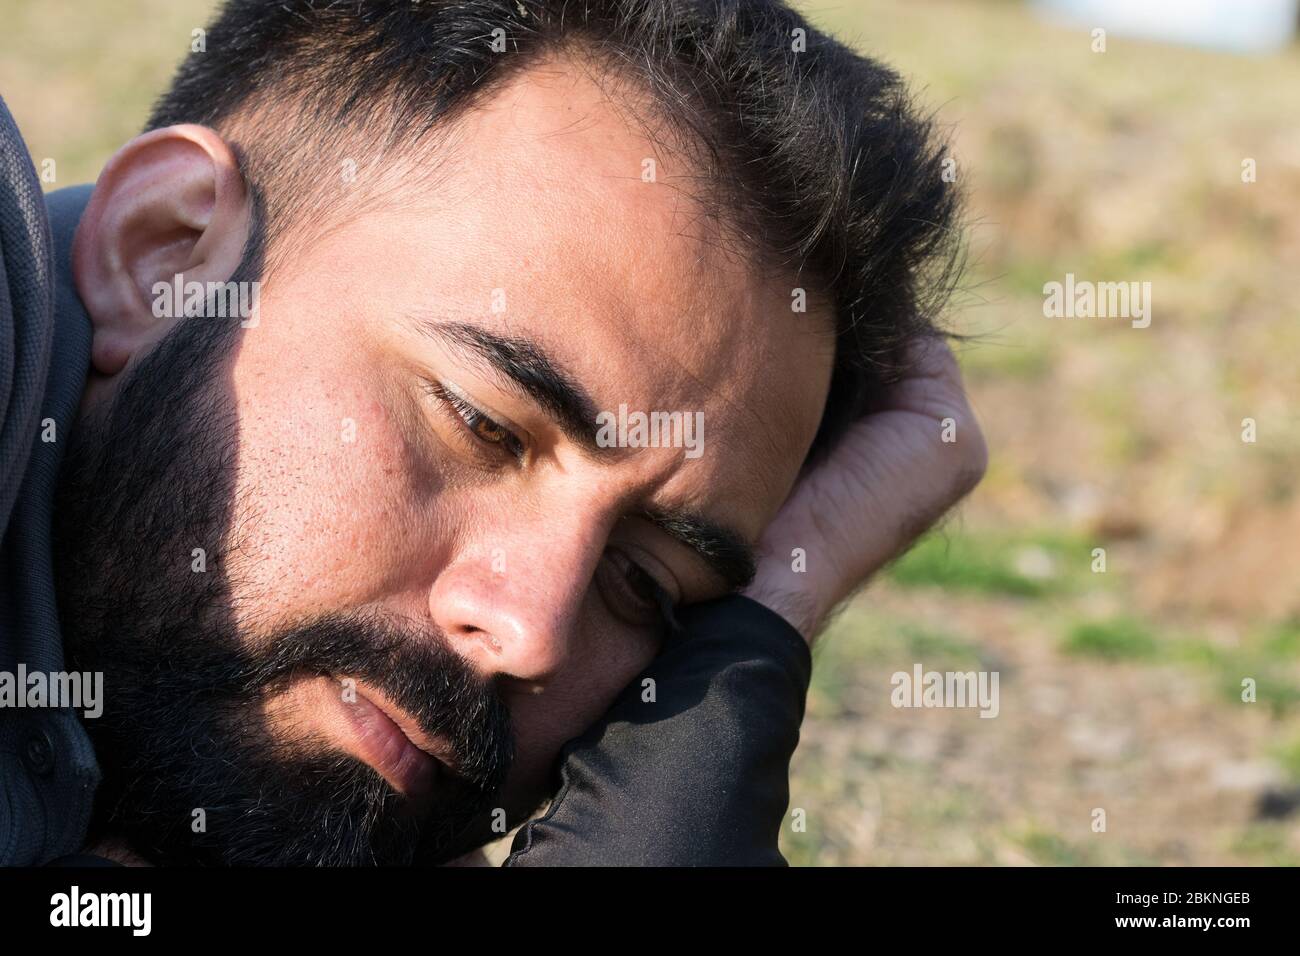 candid close up shot of bearded young man looking away Stock Photo